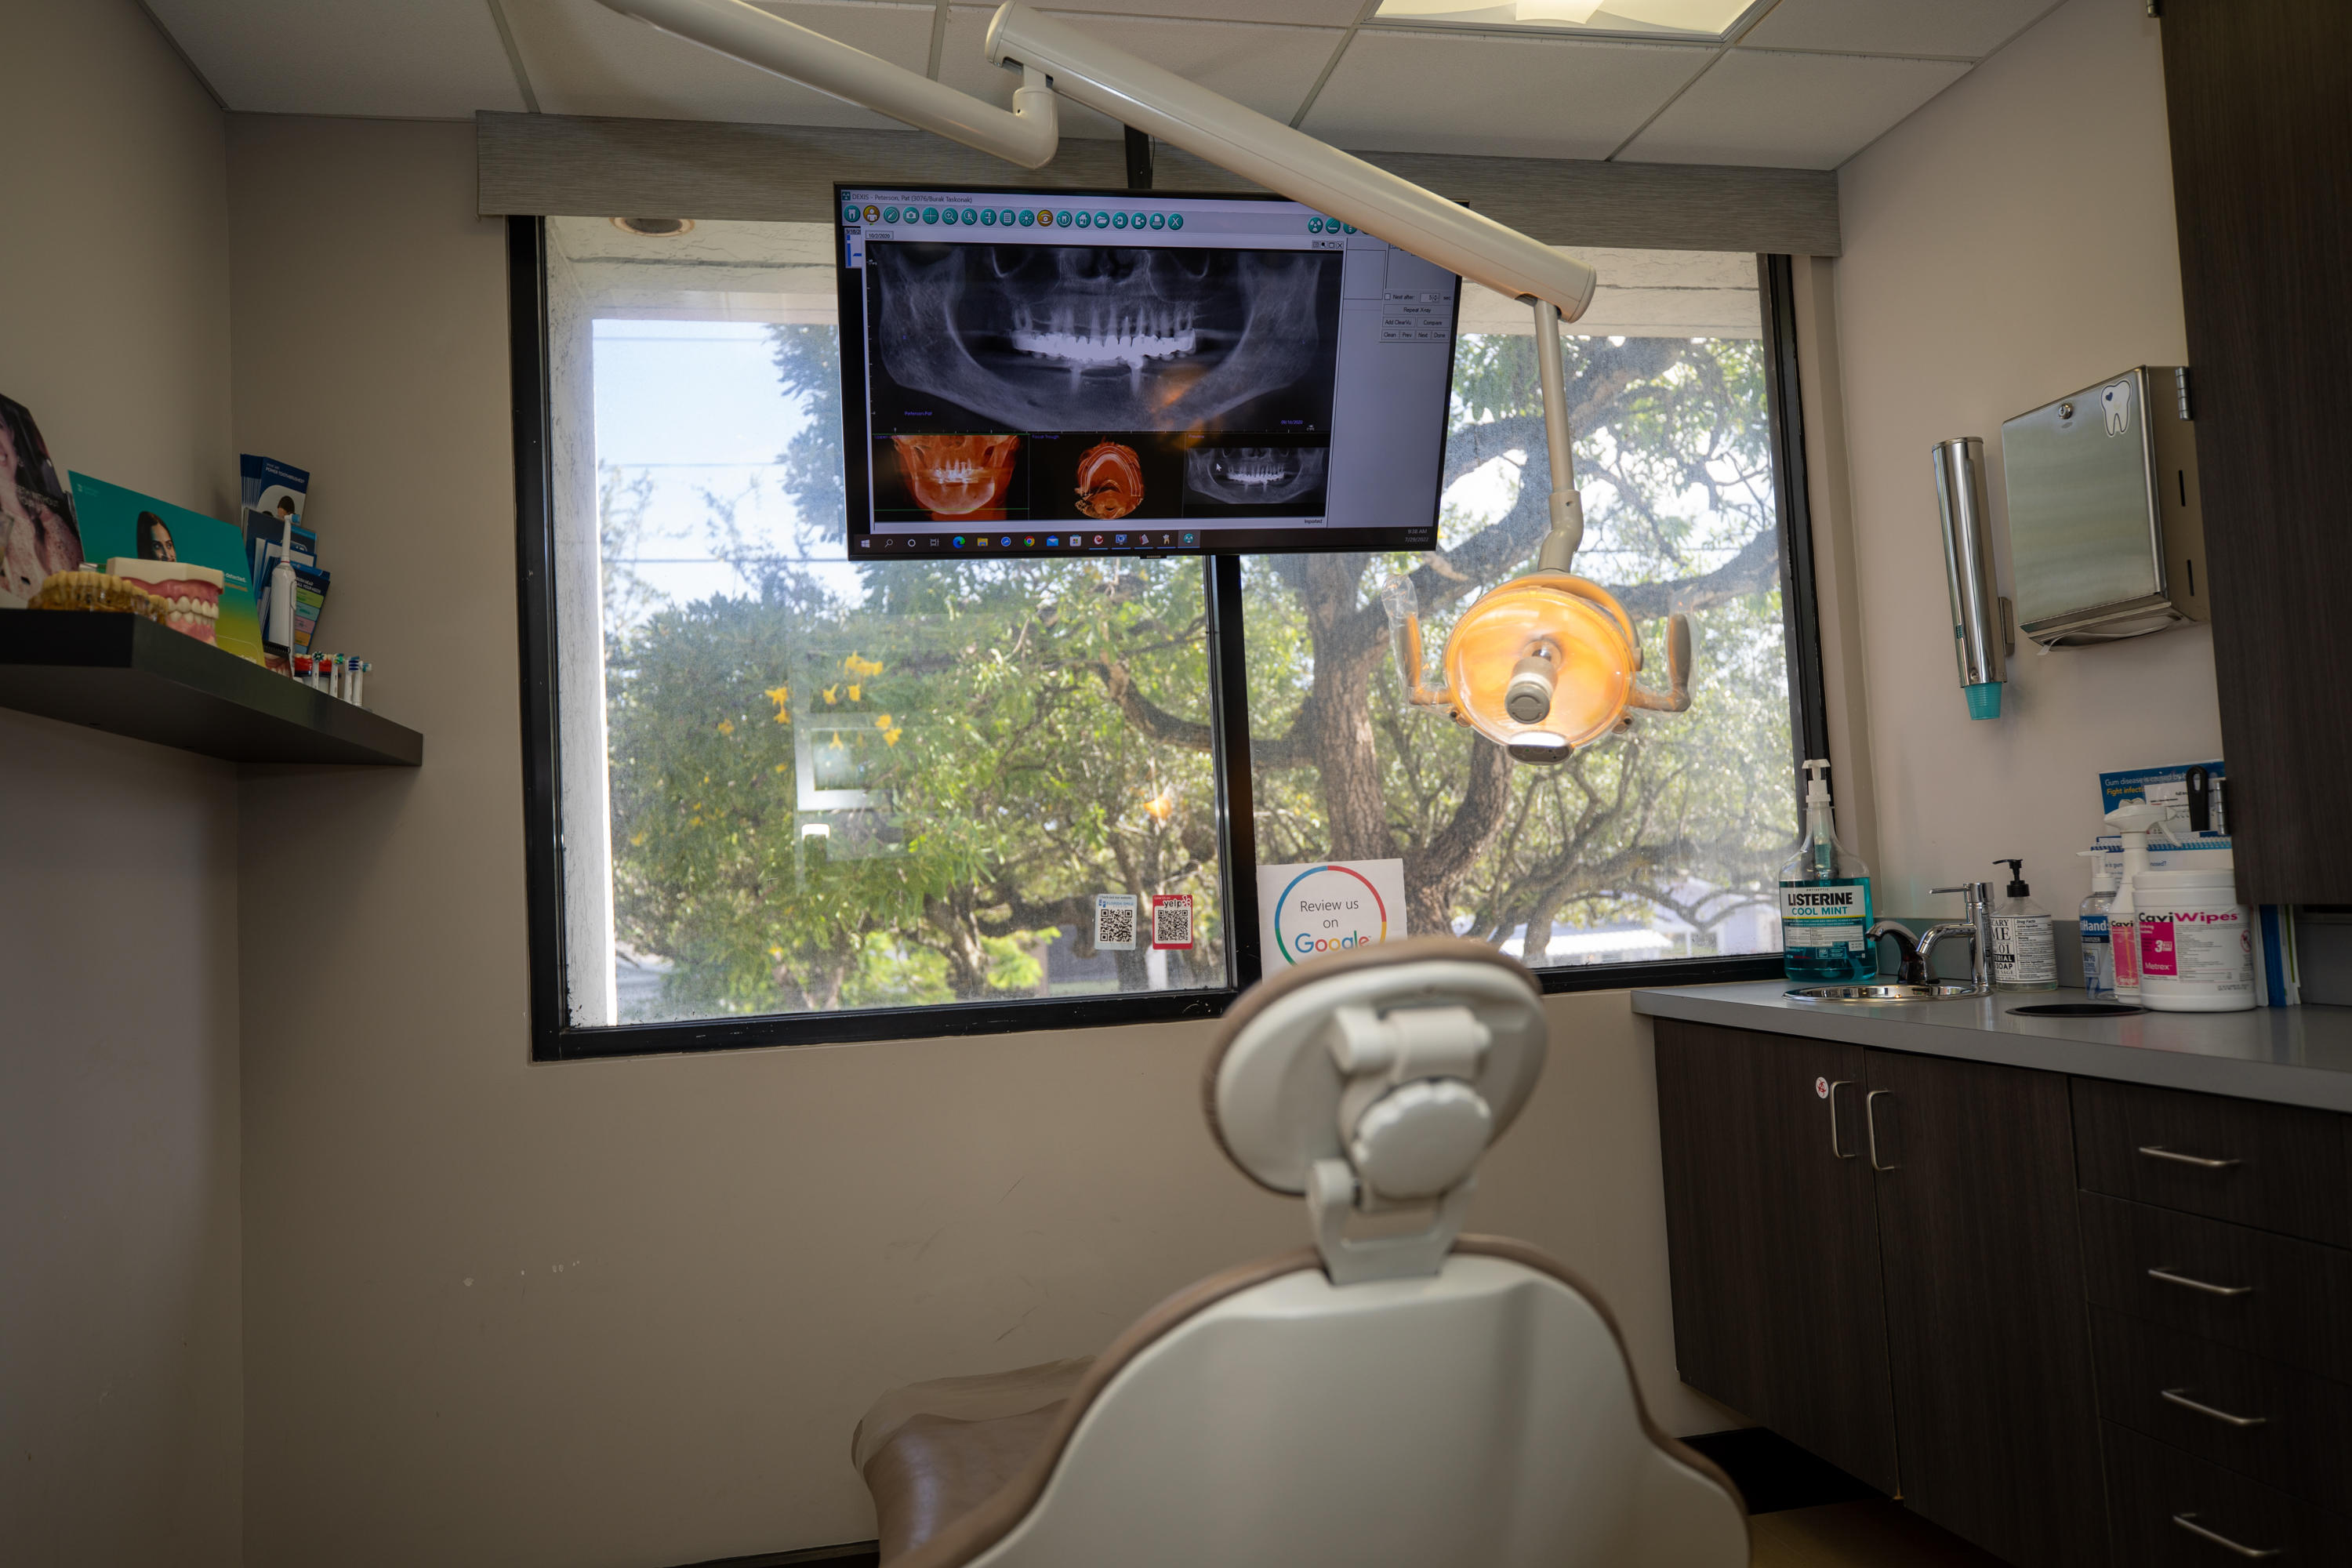 In A Day Smile Dental Implant Centers Fort Lauderdale (954)884-8790